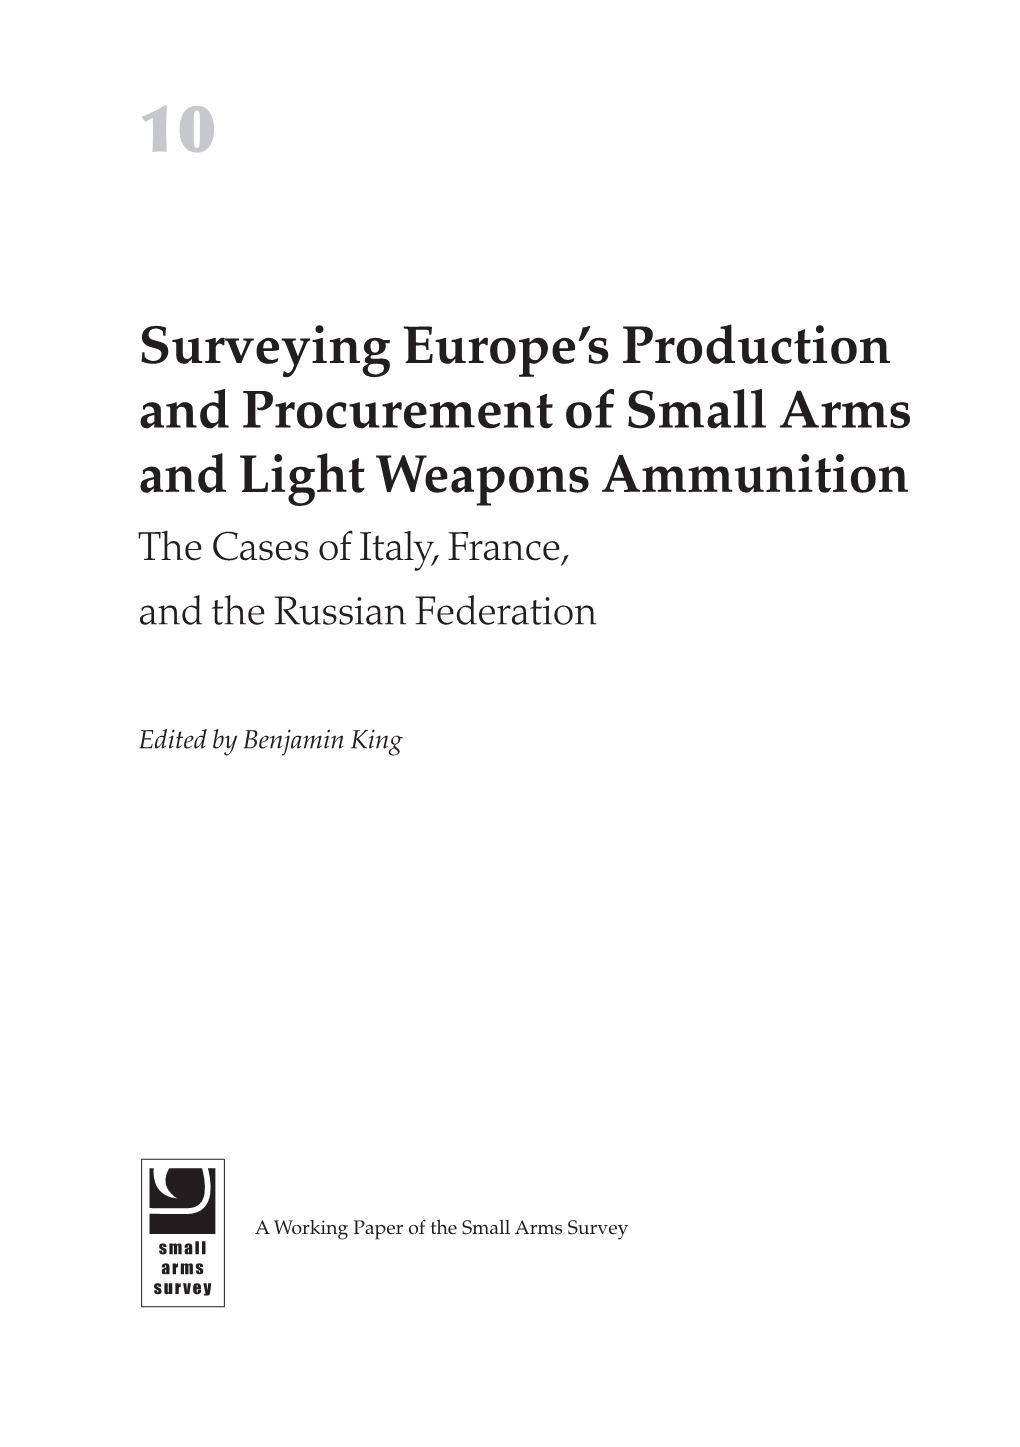 Surveying Europe's Production and Procurement of Small Arms